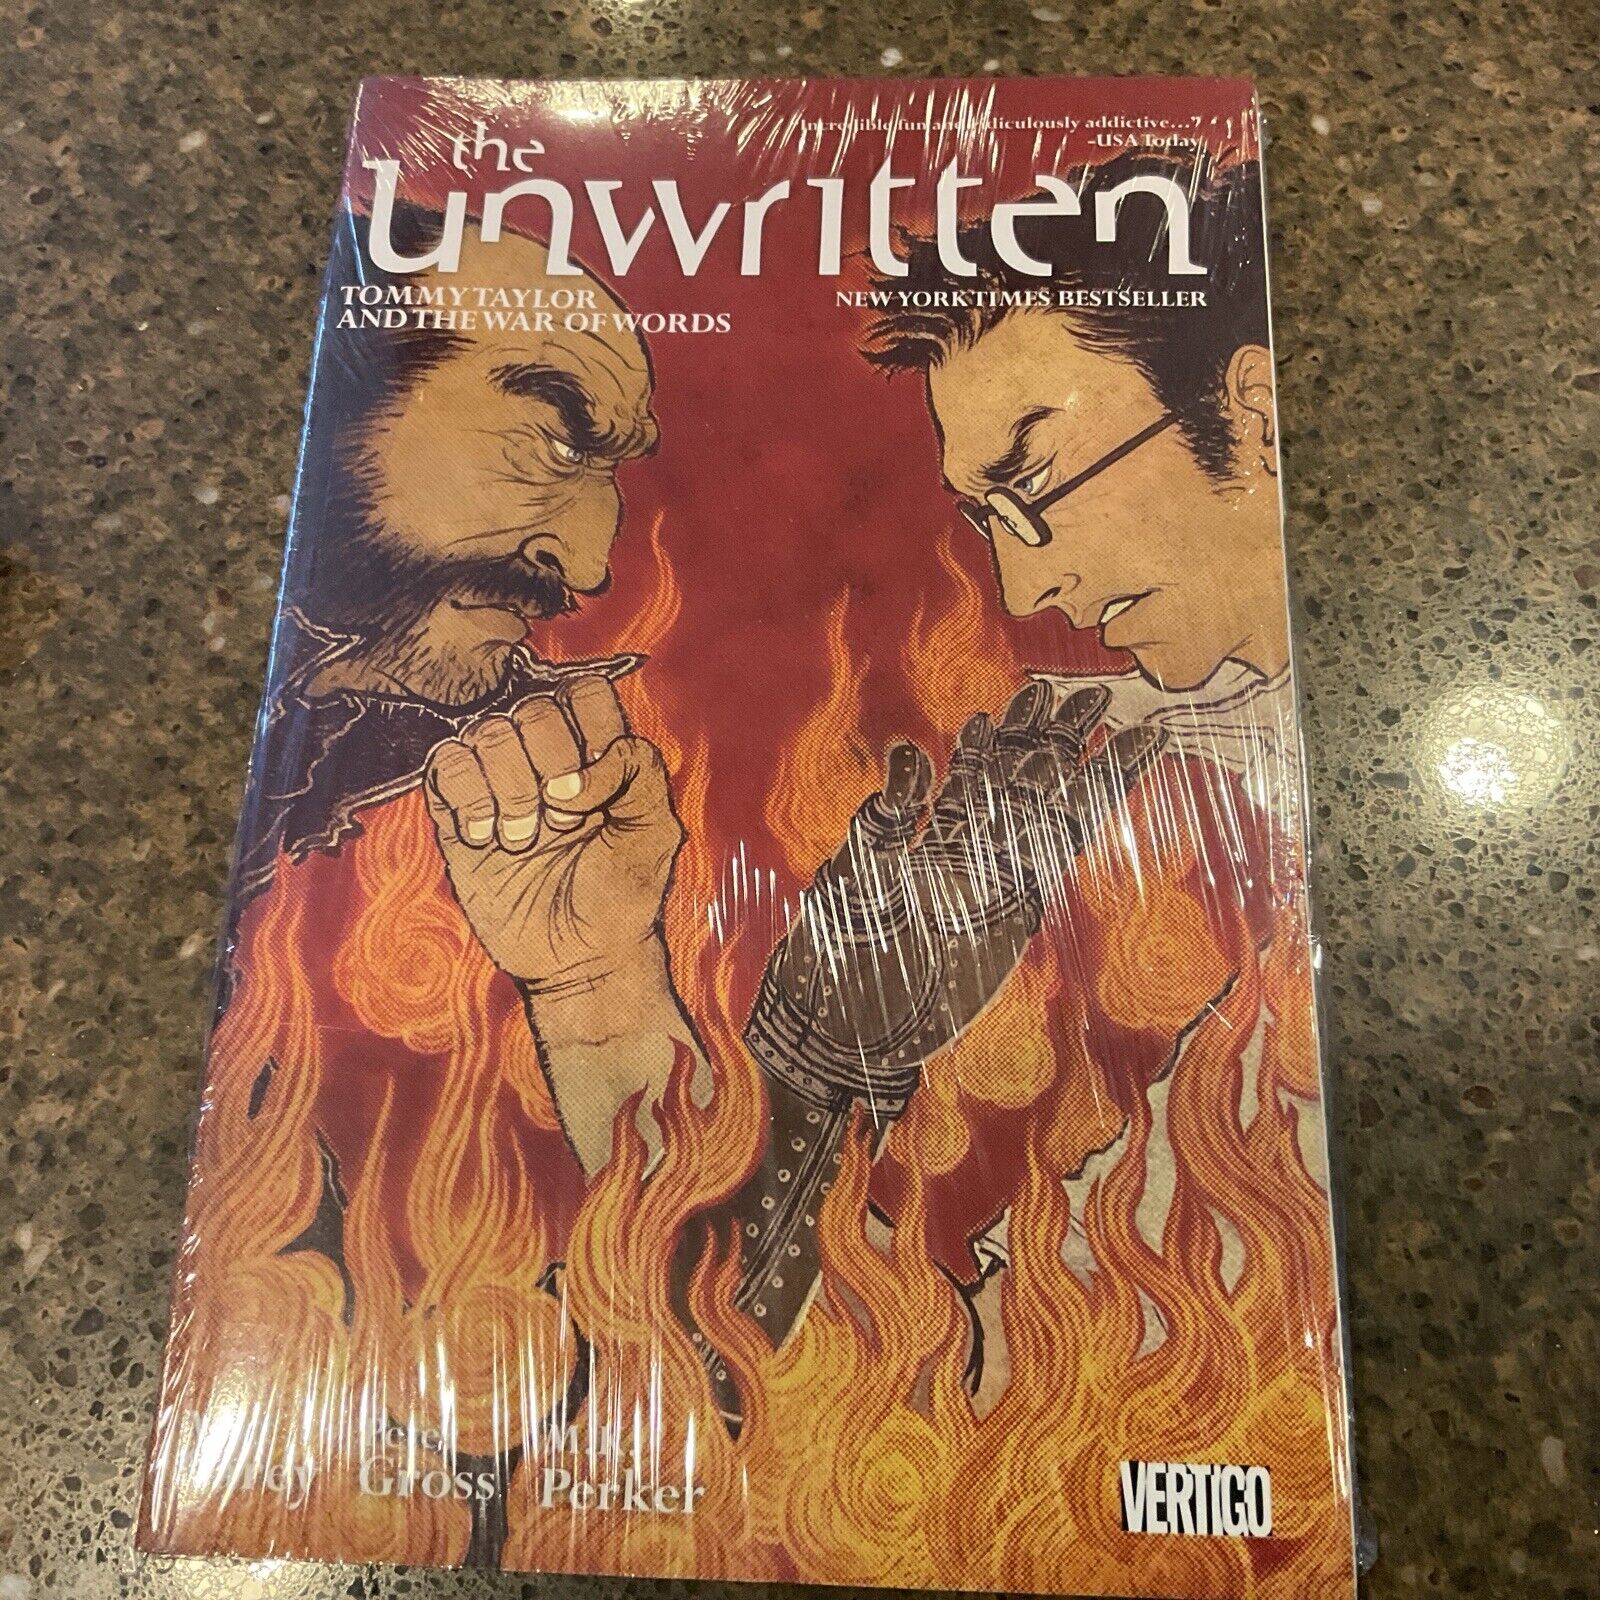 The Unwritten Vol. 6: Tommy Taylor and the War of Words Carey, Mike and Gross,